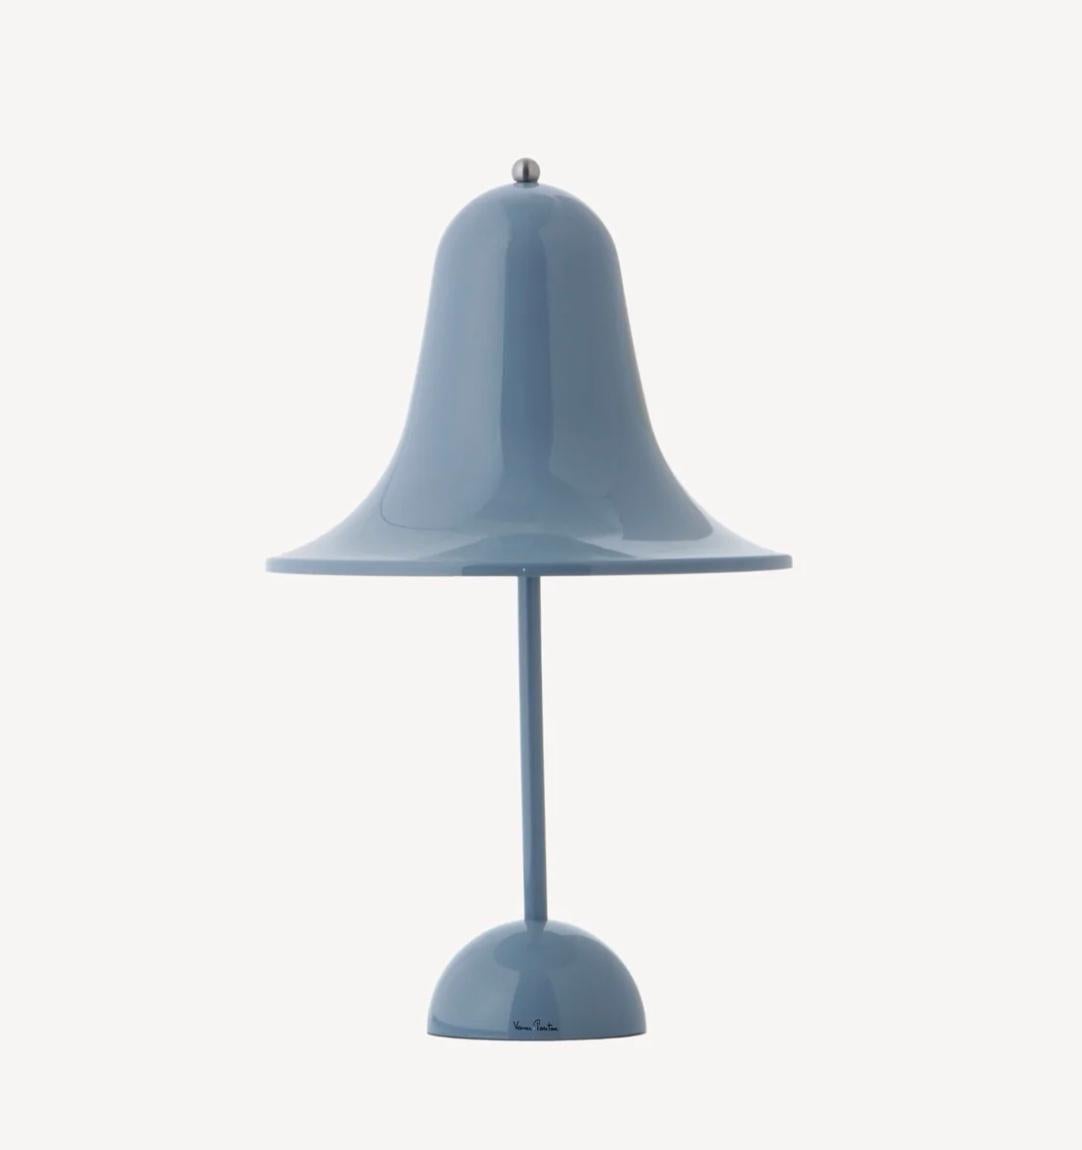 Verner Panton 'Pantop Portable' table lamp in 'Dusty Blue' for Verpan. Designed in 1980. New, current production.

This is a versatile smaller and wireless version of the 'Pantop' table lamp, usb-chargeable. 

The elegant Pantop line was designed by